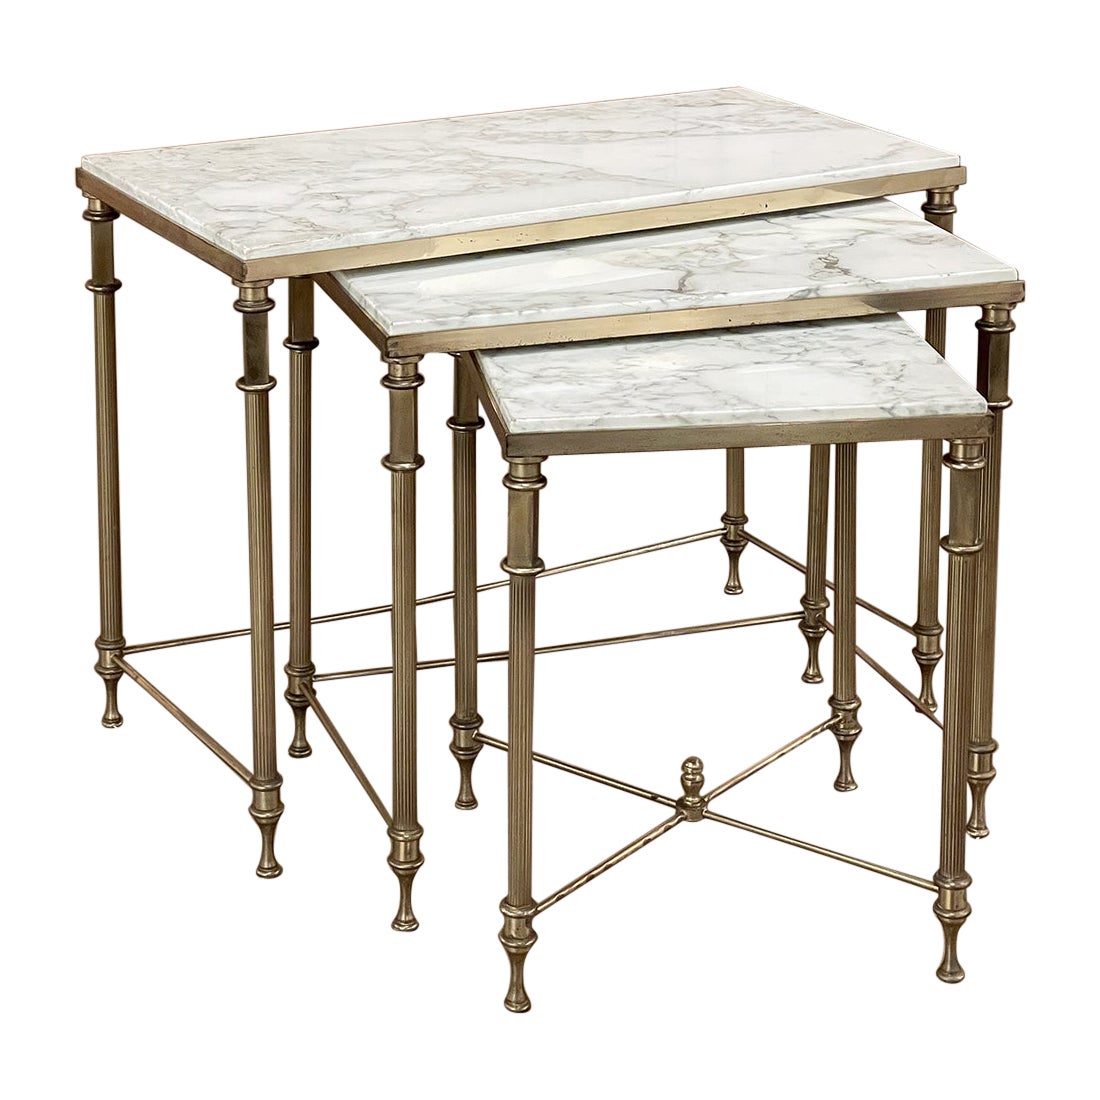 Midcentury French Neoclassical Brass Nesting Tables with Marble Tops